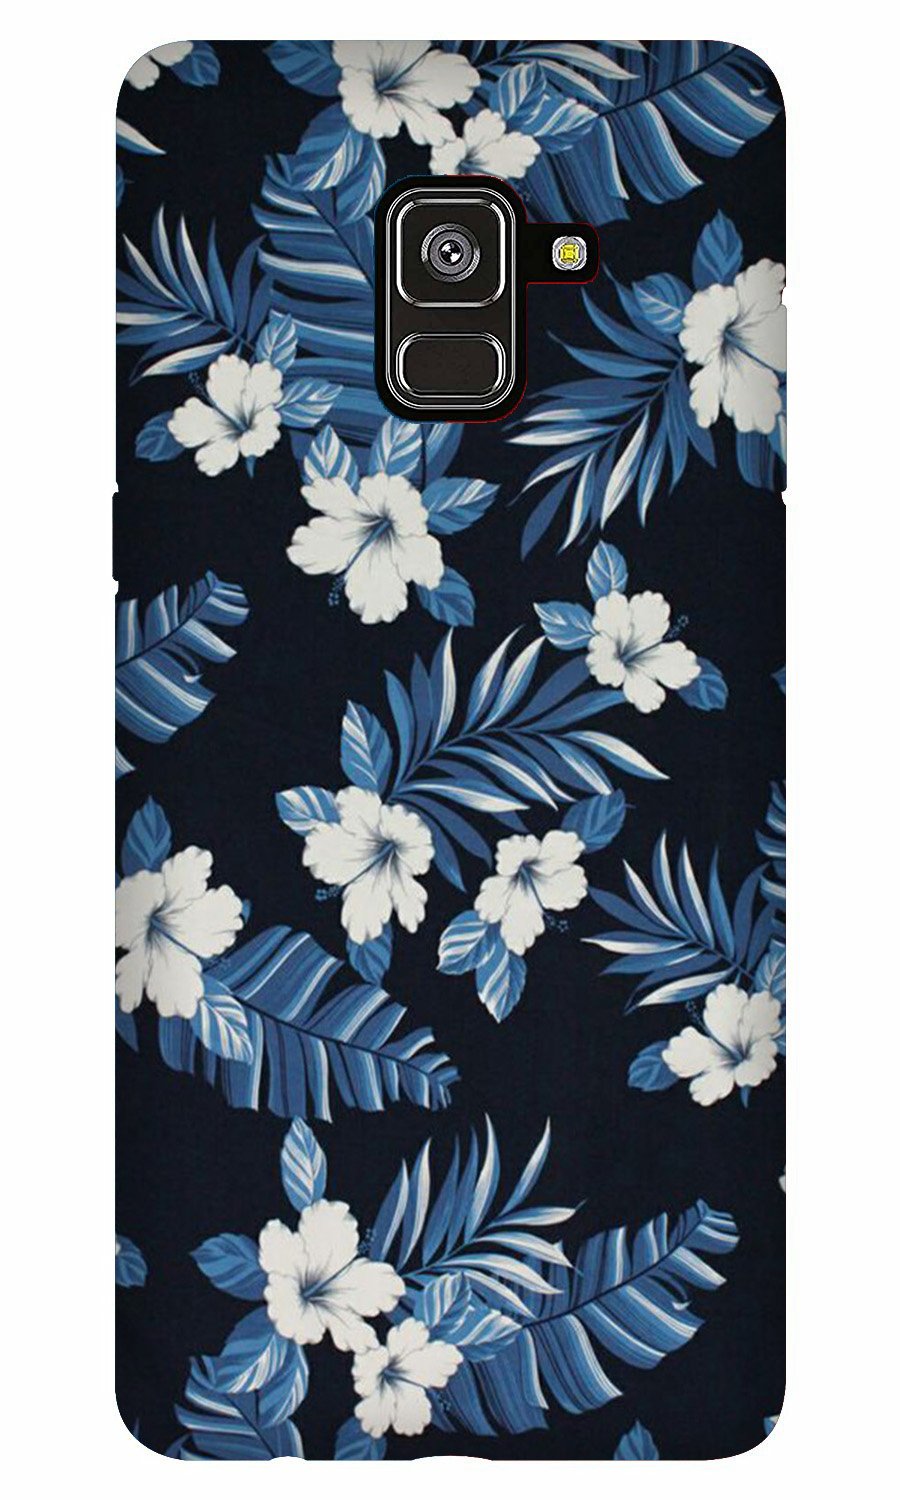 White flowers Blue Background2 Case for Galaxy A8 Plus